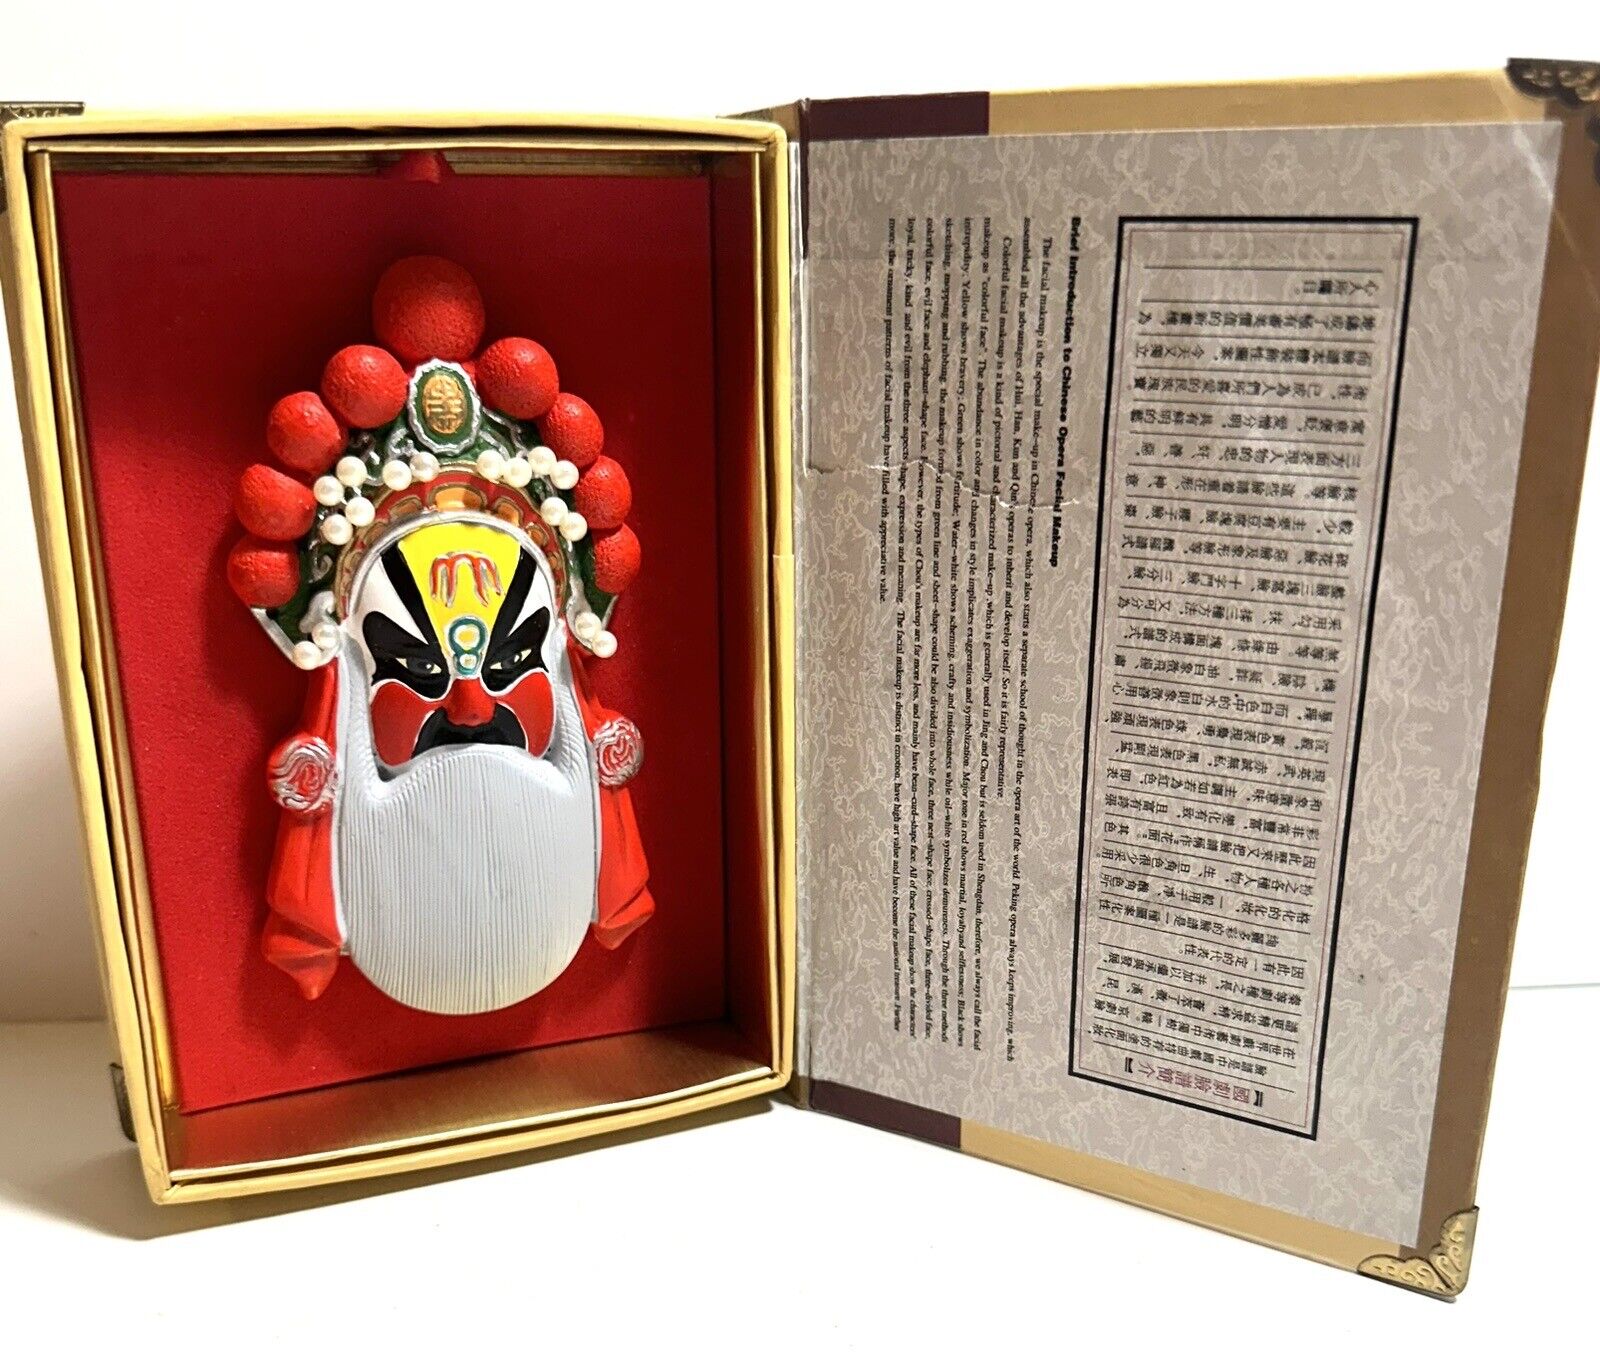 Chinese Handcrafted Folk Art One Of The Five Treasury Gods Original Box Vintage